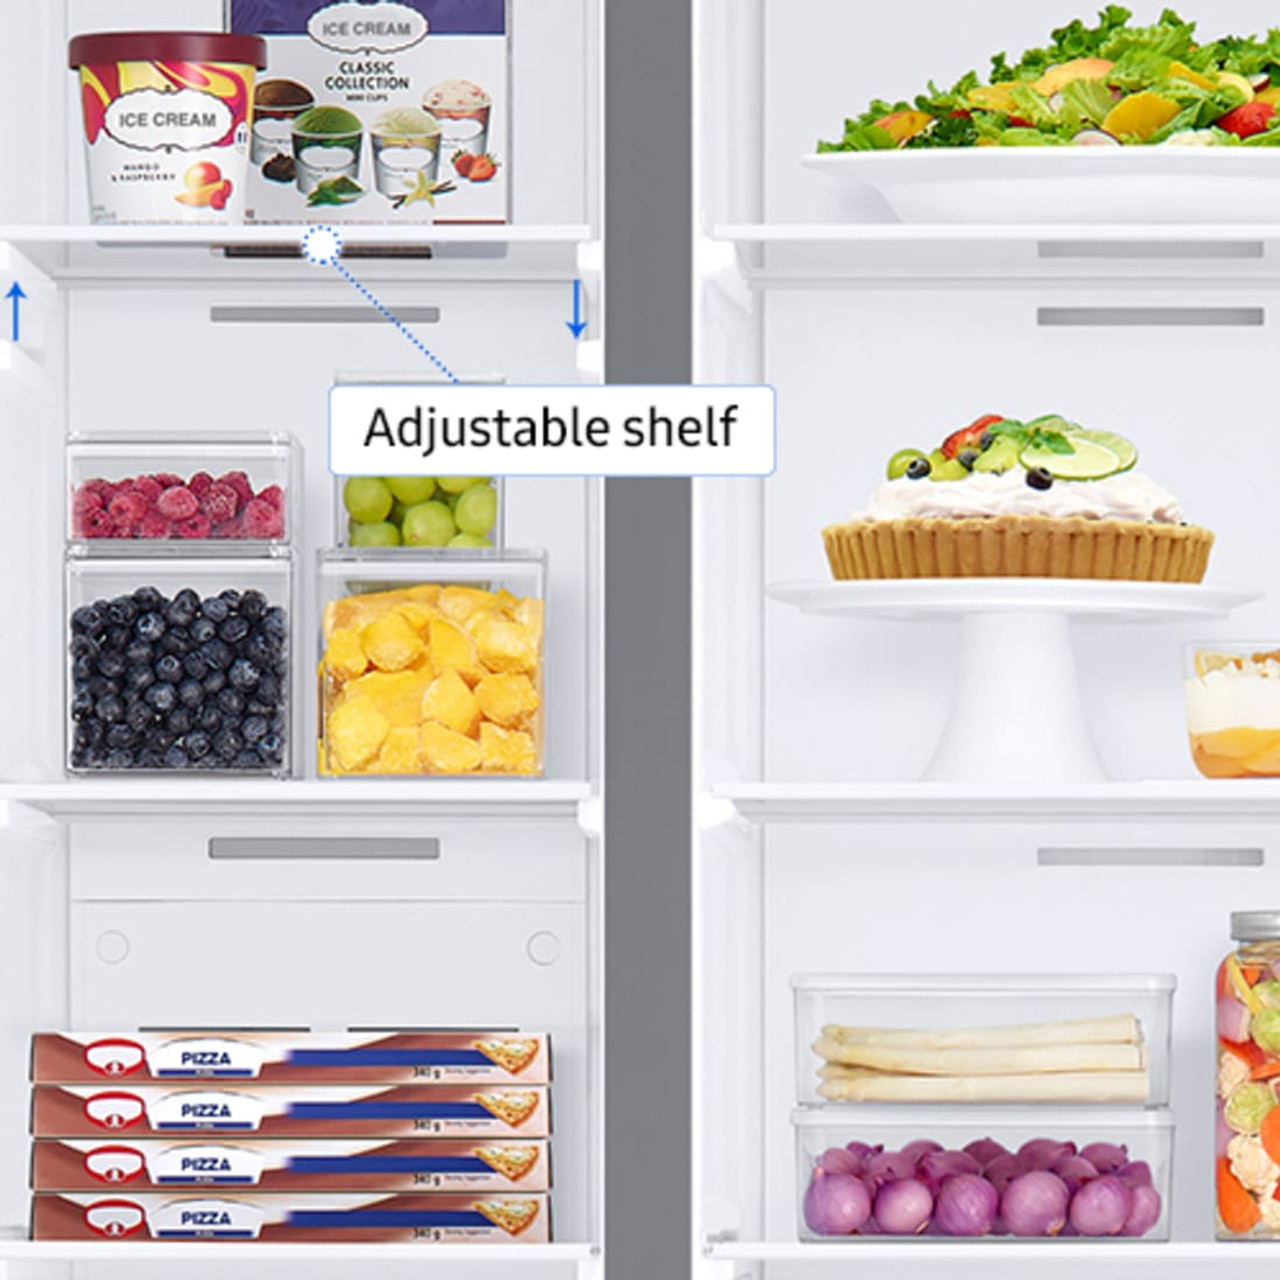 Samsung 22 cu. ft. Counter Depth Side by Side Refrigerator with Family Hub - Stainless Steel